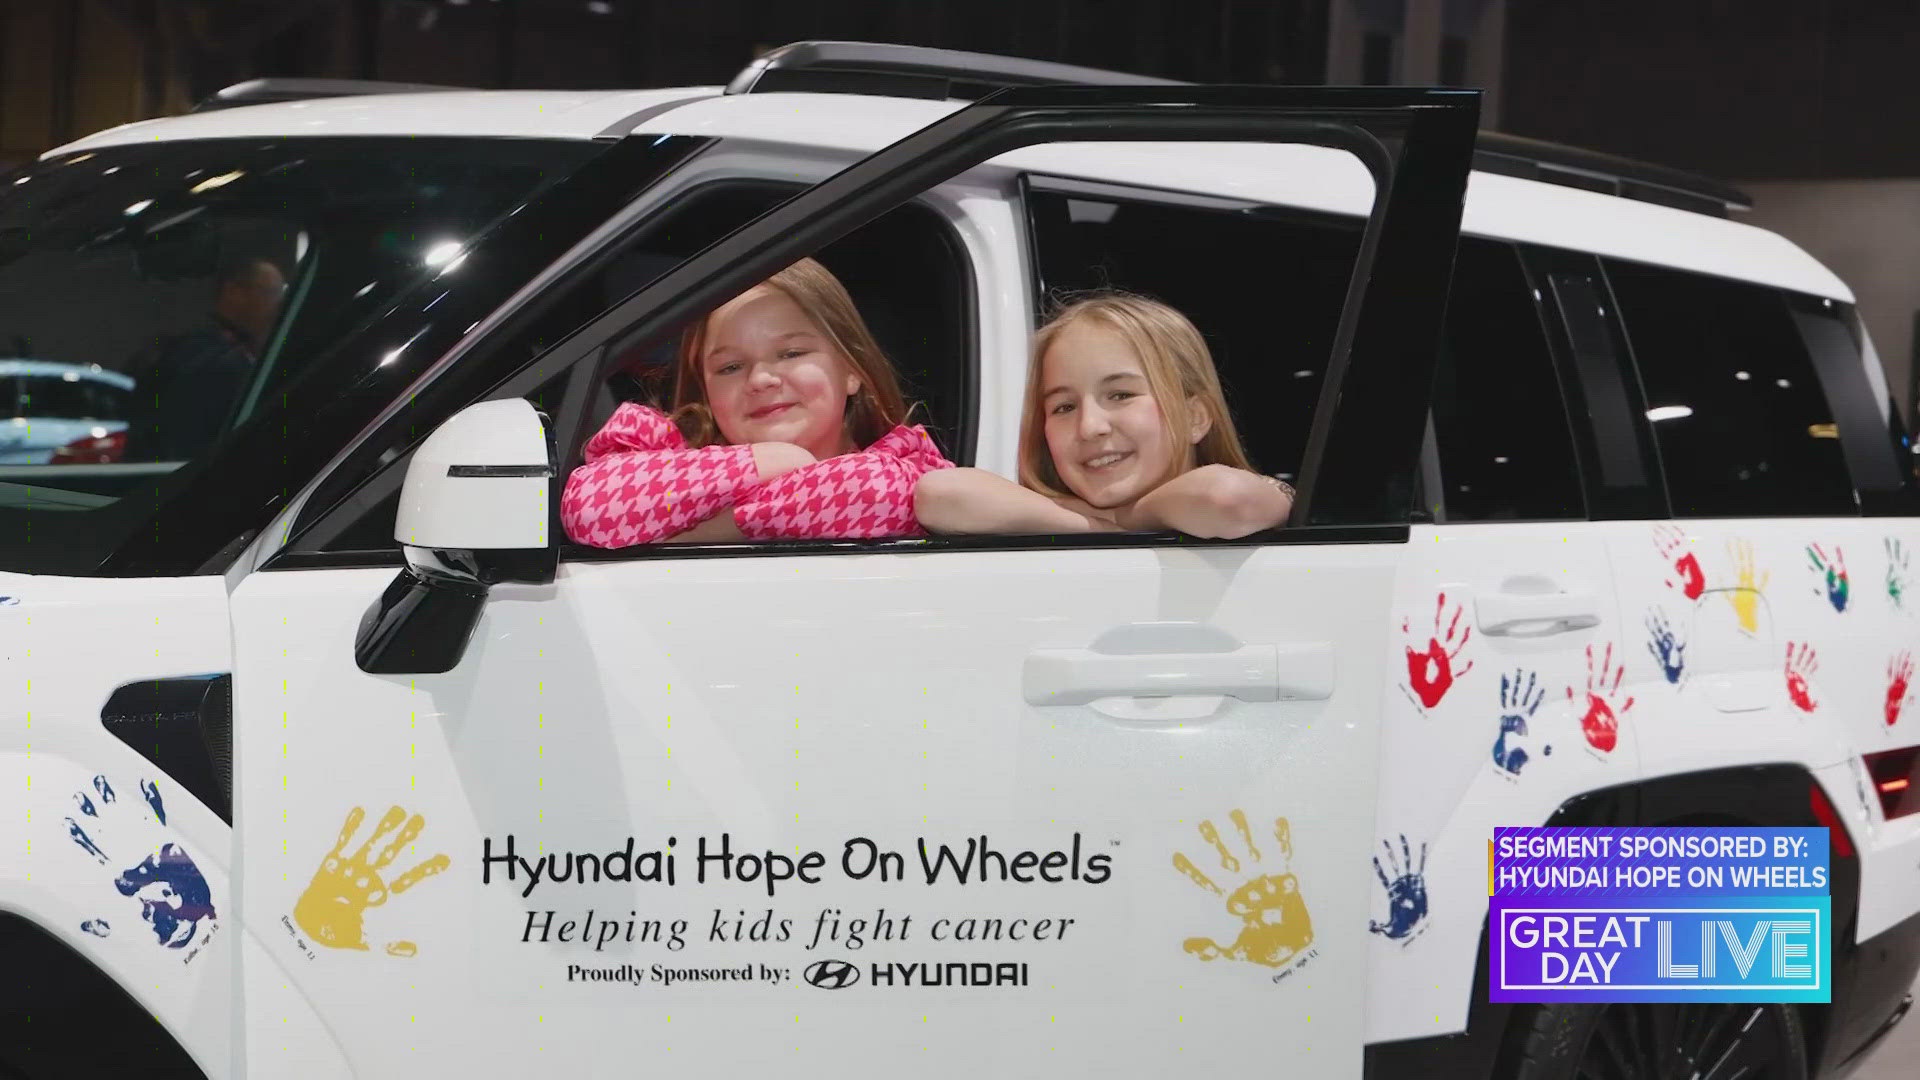 GDL caught up with Hope on Wheels board member and National Youth Ambassadors for Hyundai.